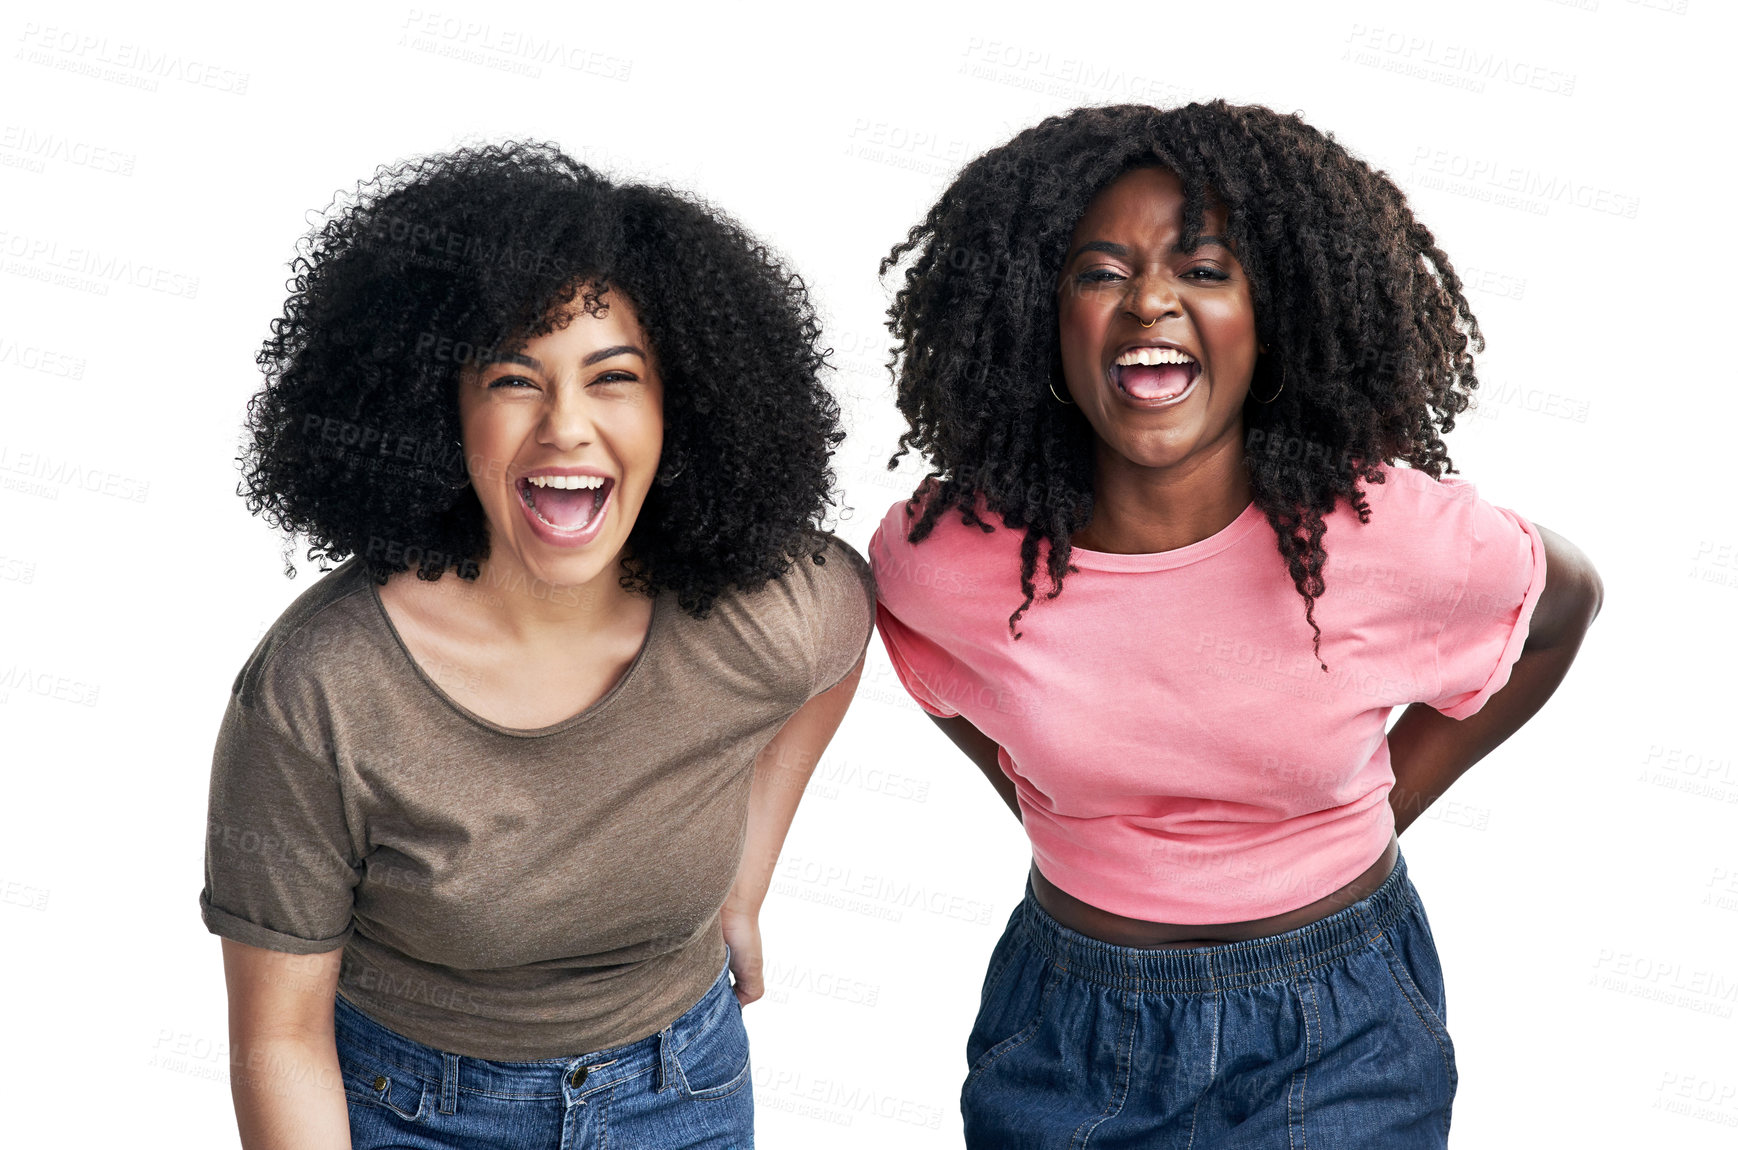 Buy stock photo Studio shot of two young women laughing against a white background